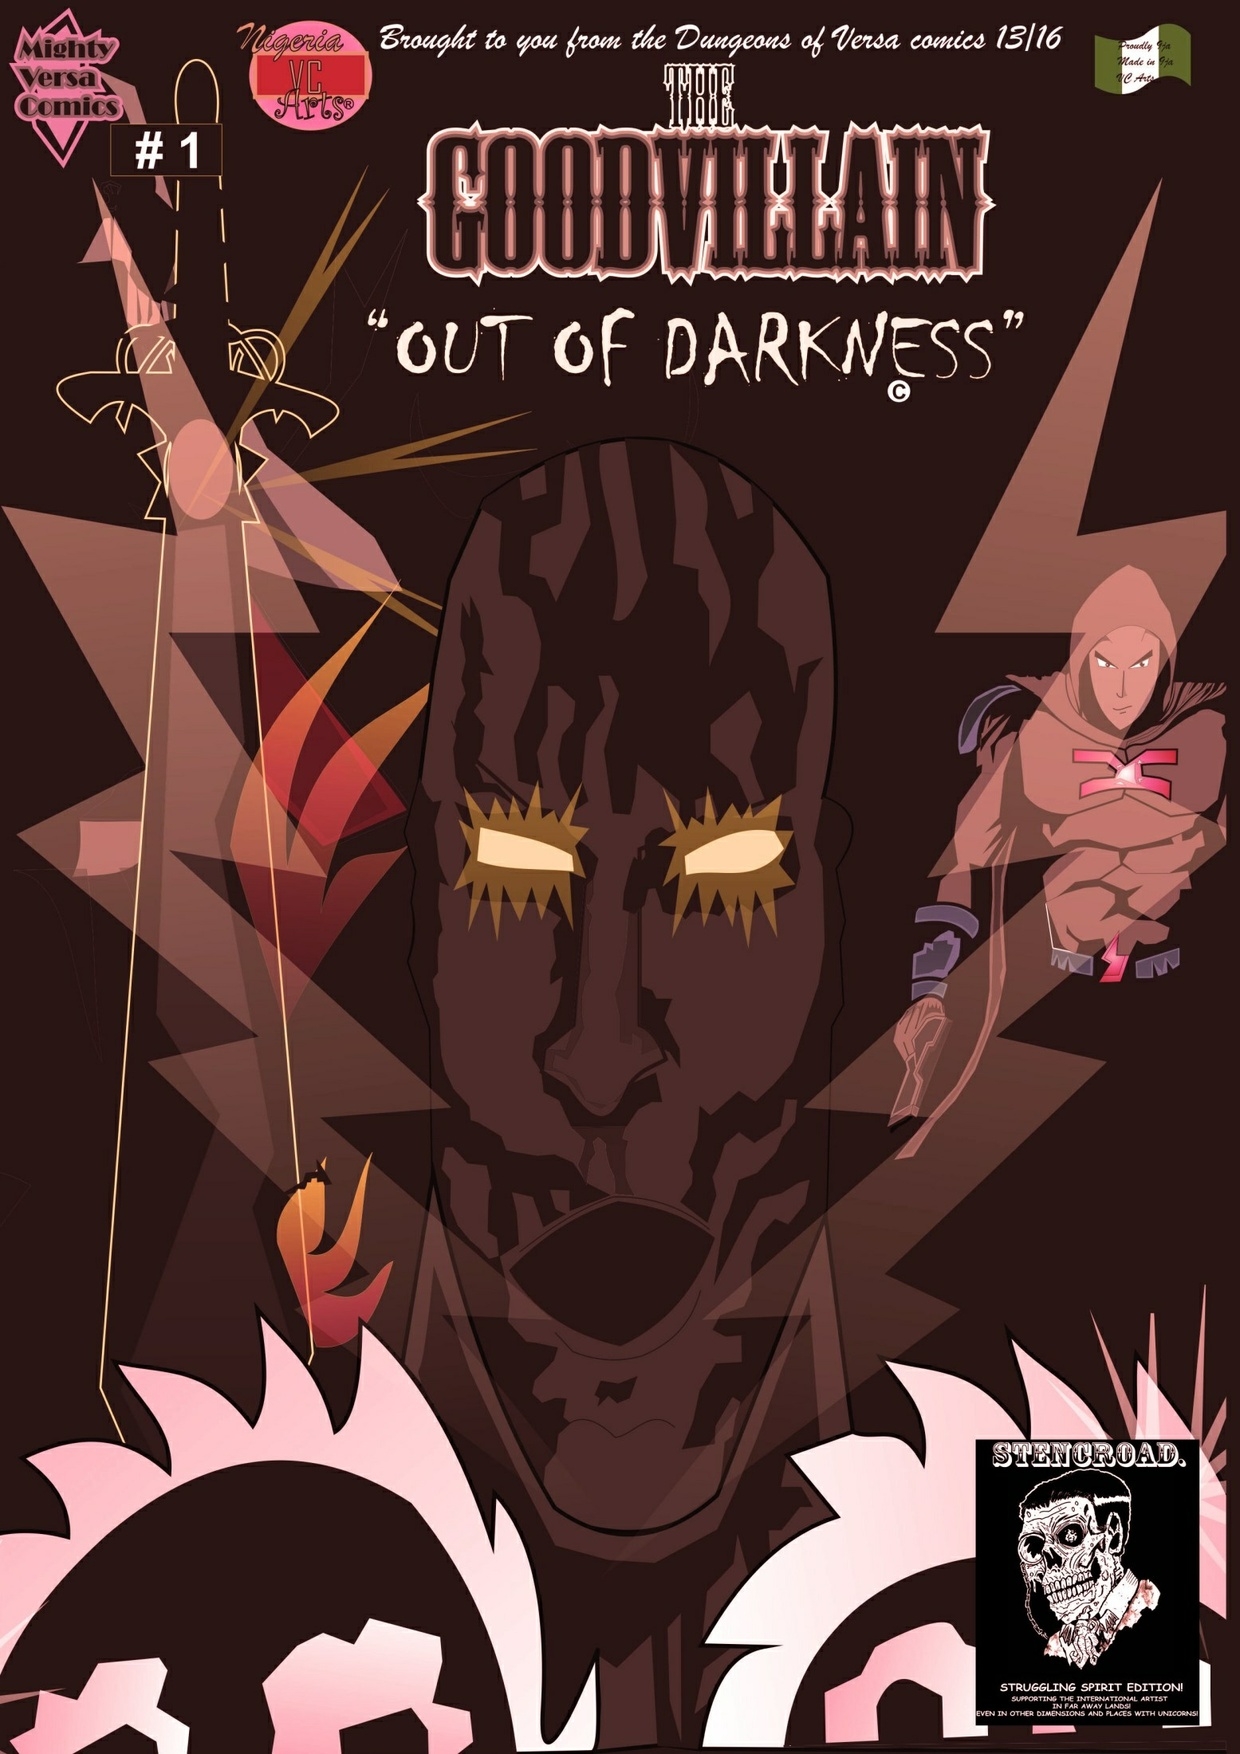 The Good Villain “Out of Darkness” :: A Throw BacK Thread